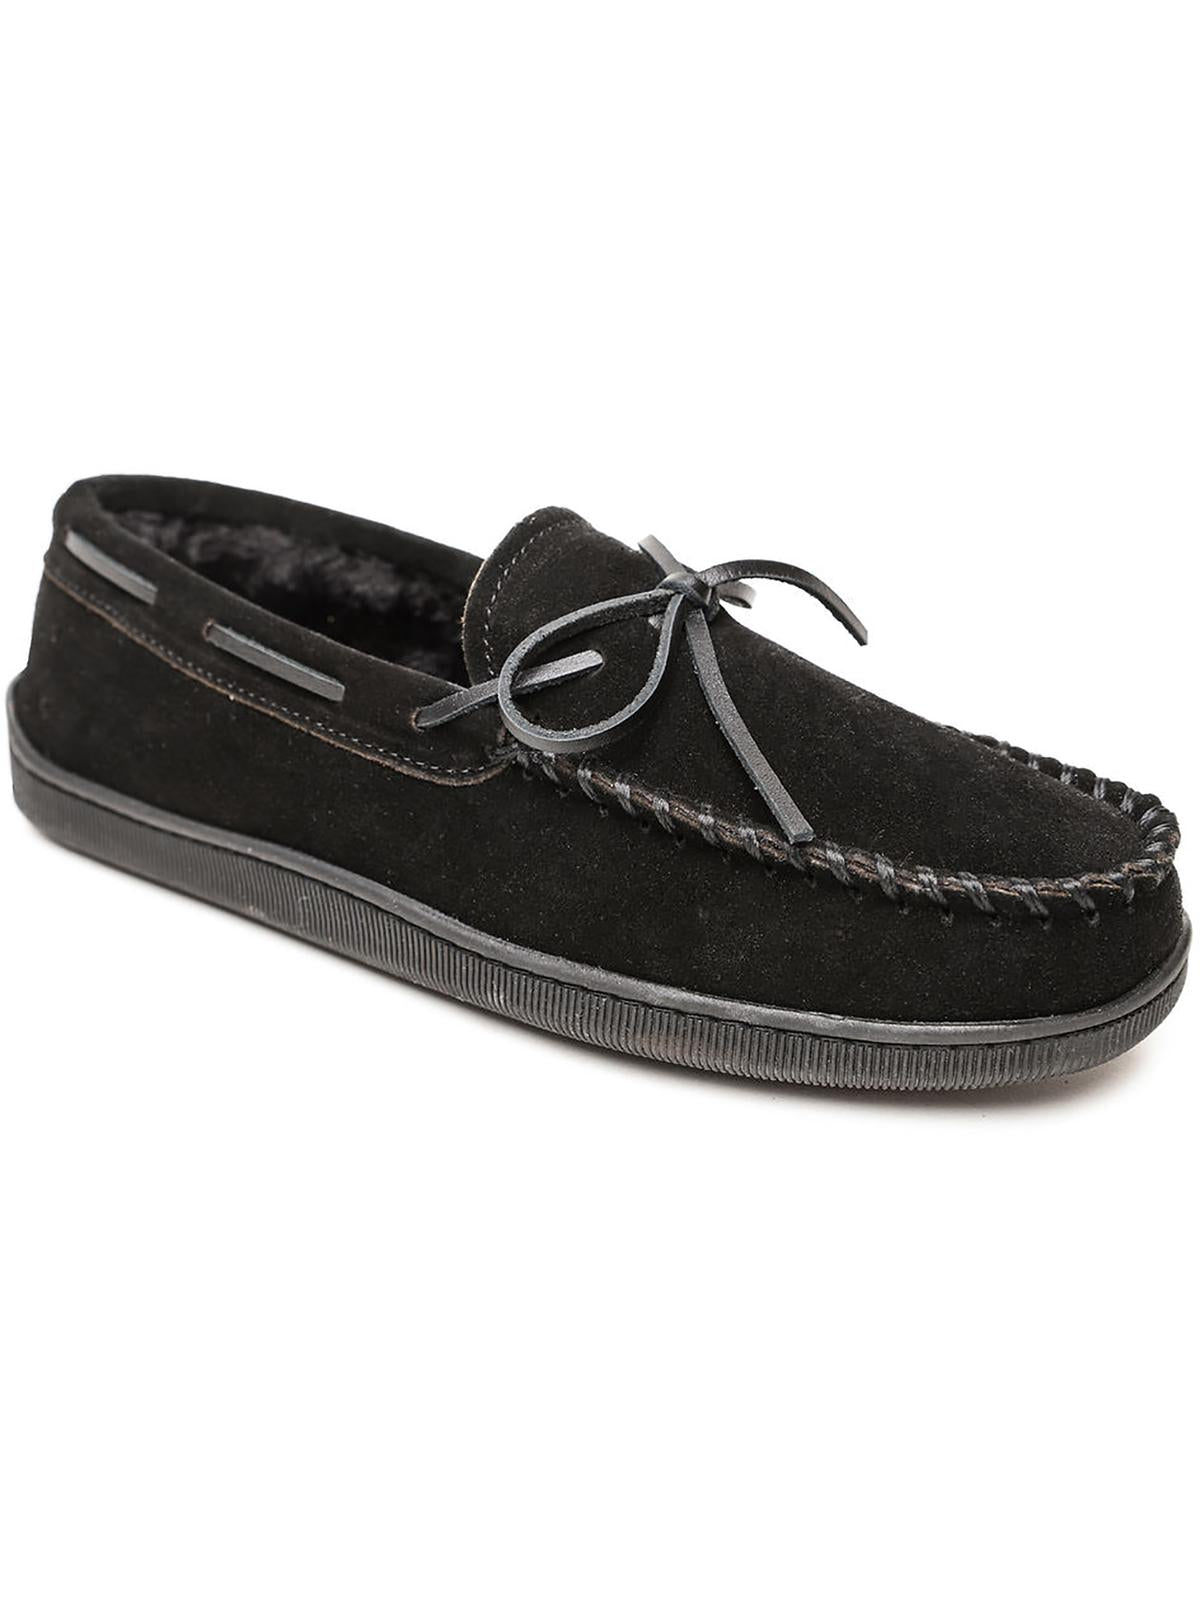 MINNETONKA Pile Lined Hardsole Mens Faux Suede Bow Moccasin Slippers